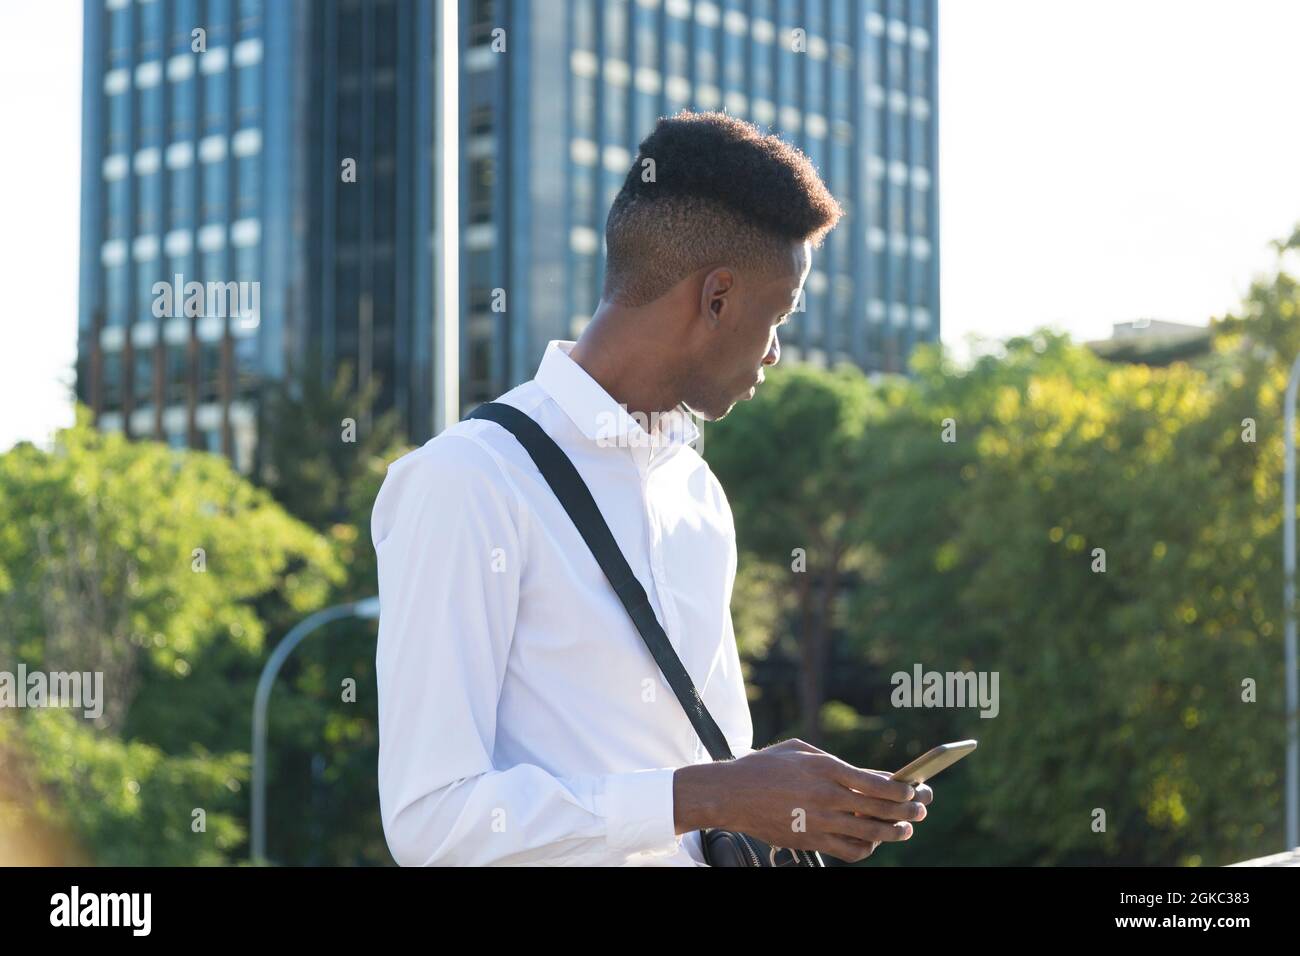 young afroamerican businessman with briefcase using phone in city Stock Photo